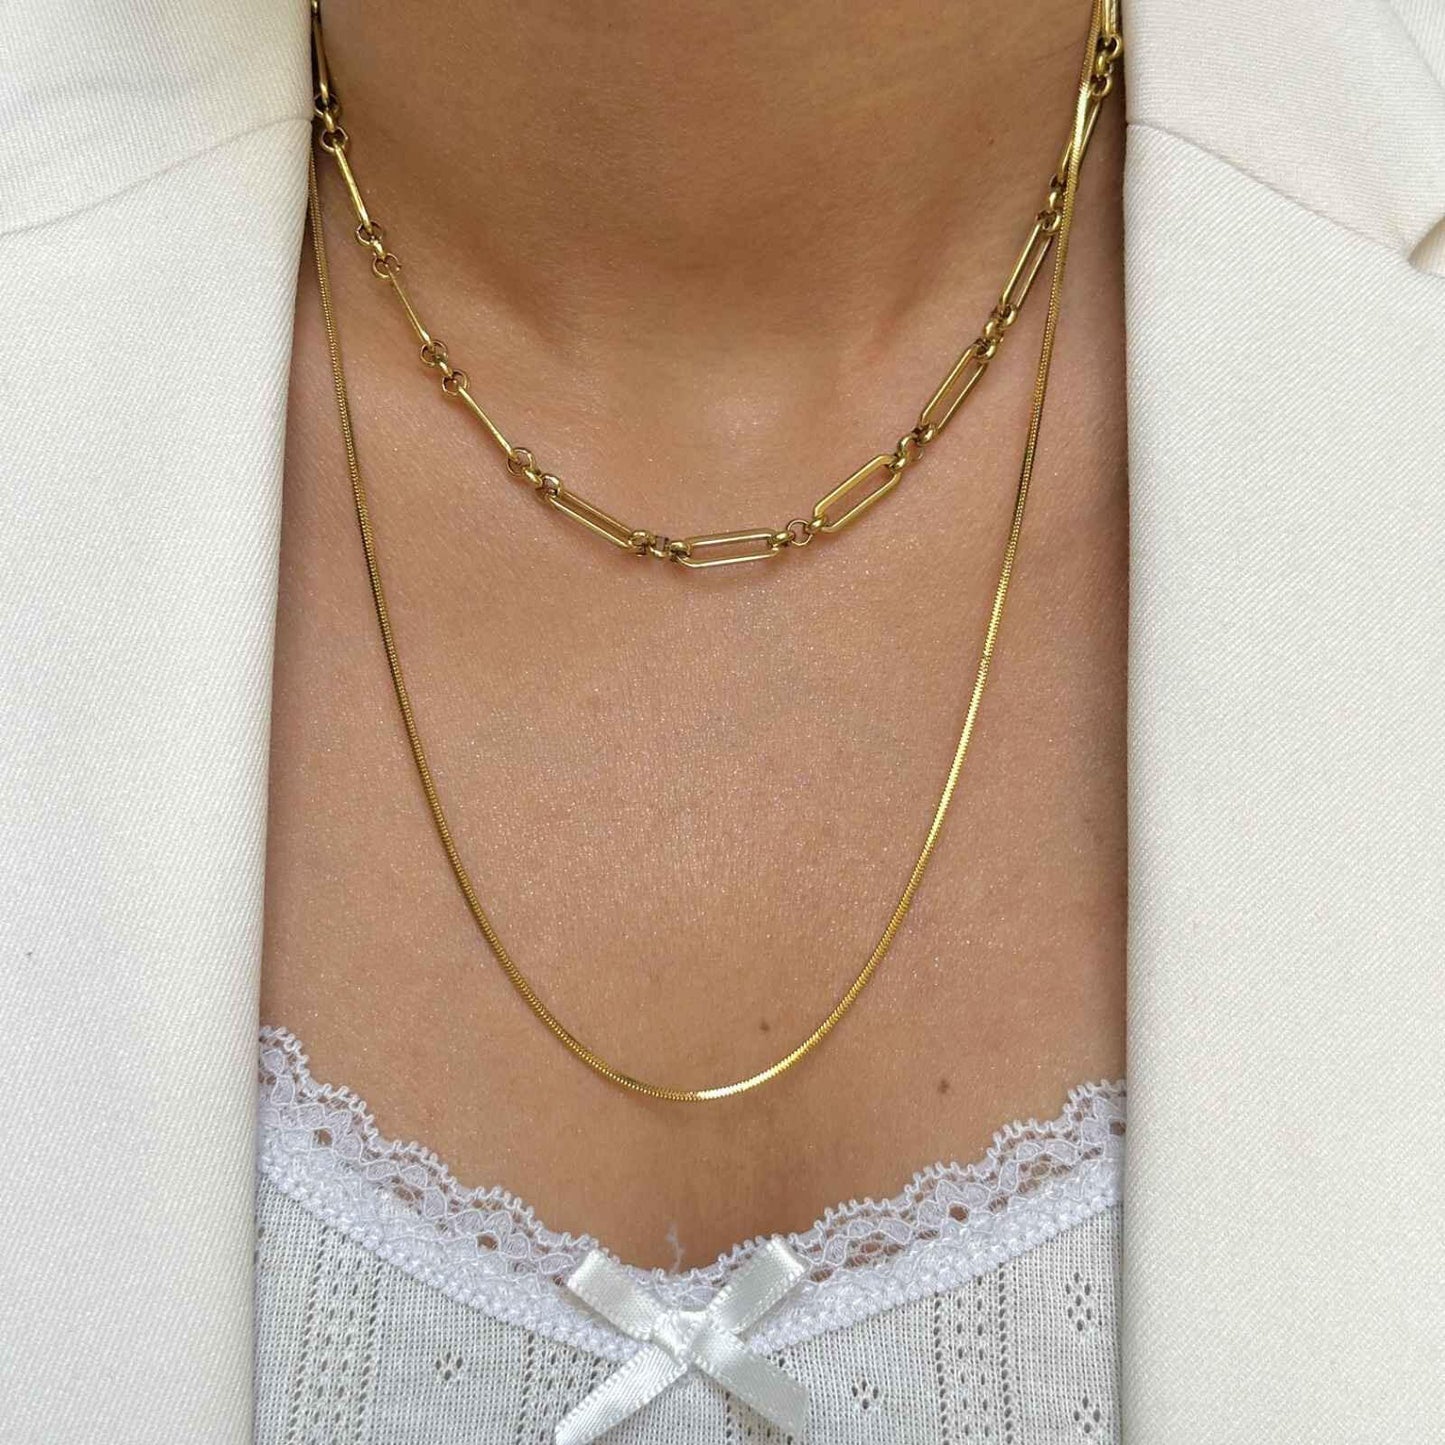 Pin it Necklace Set  The Chic Women.